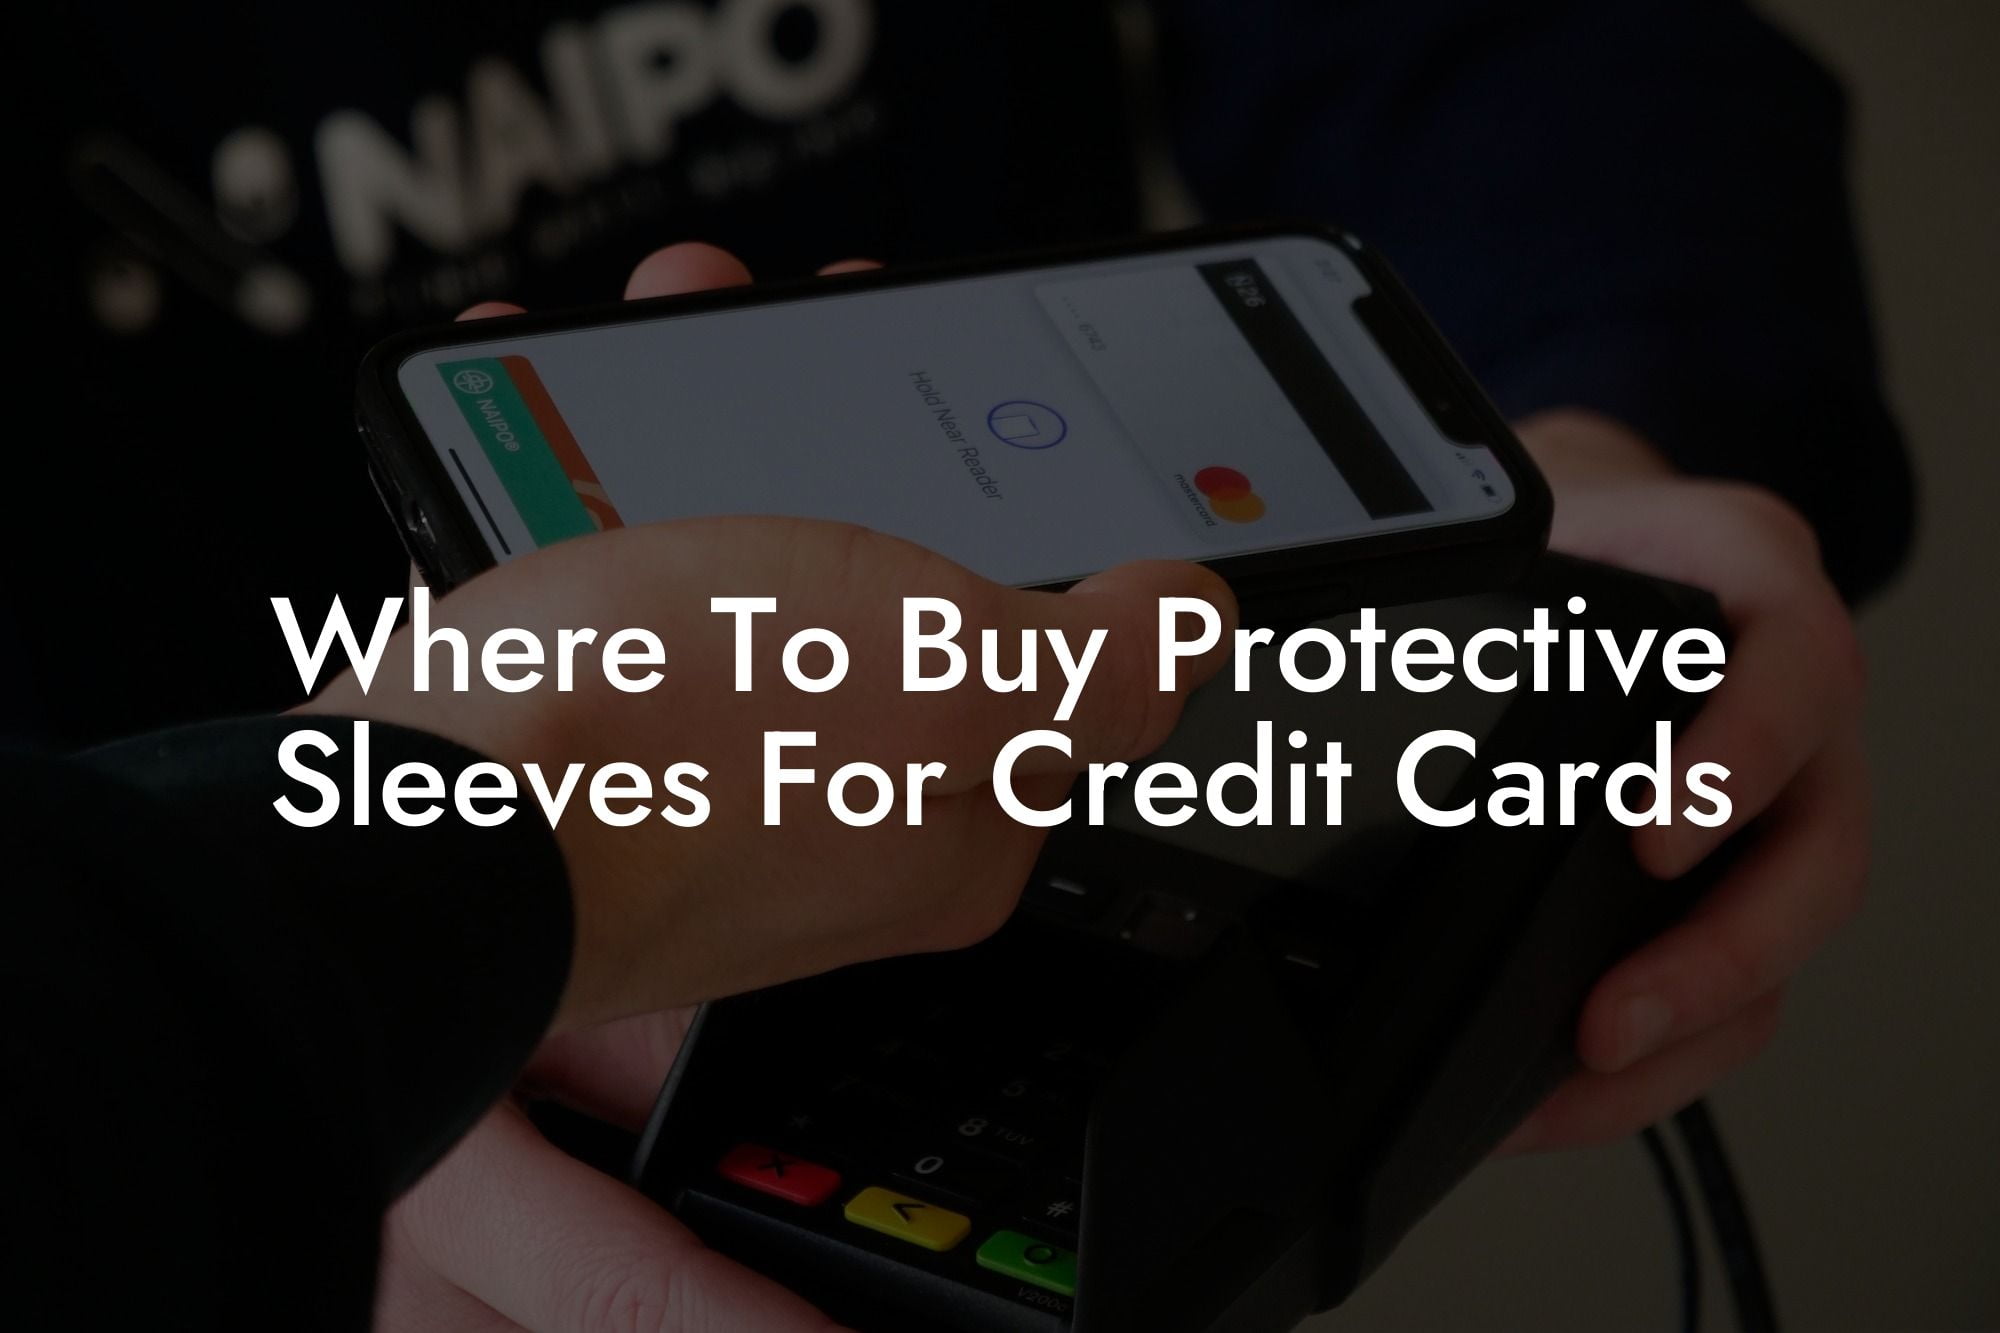 Where To Buy Protective Sleeves For Credit Cards